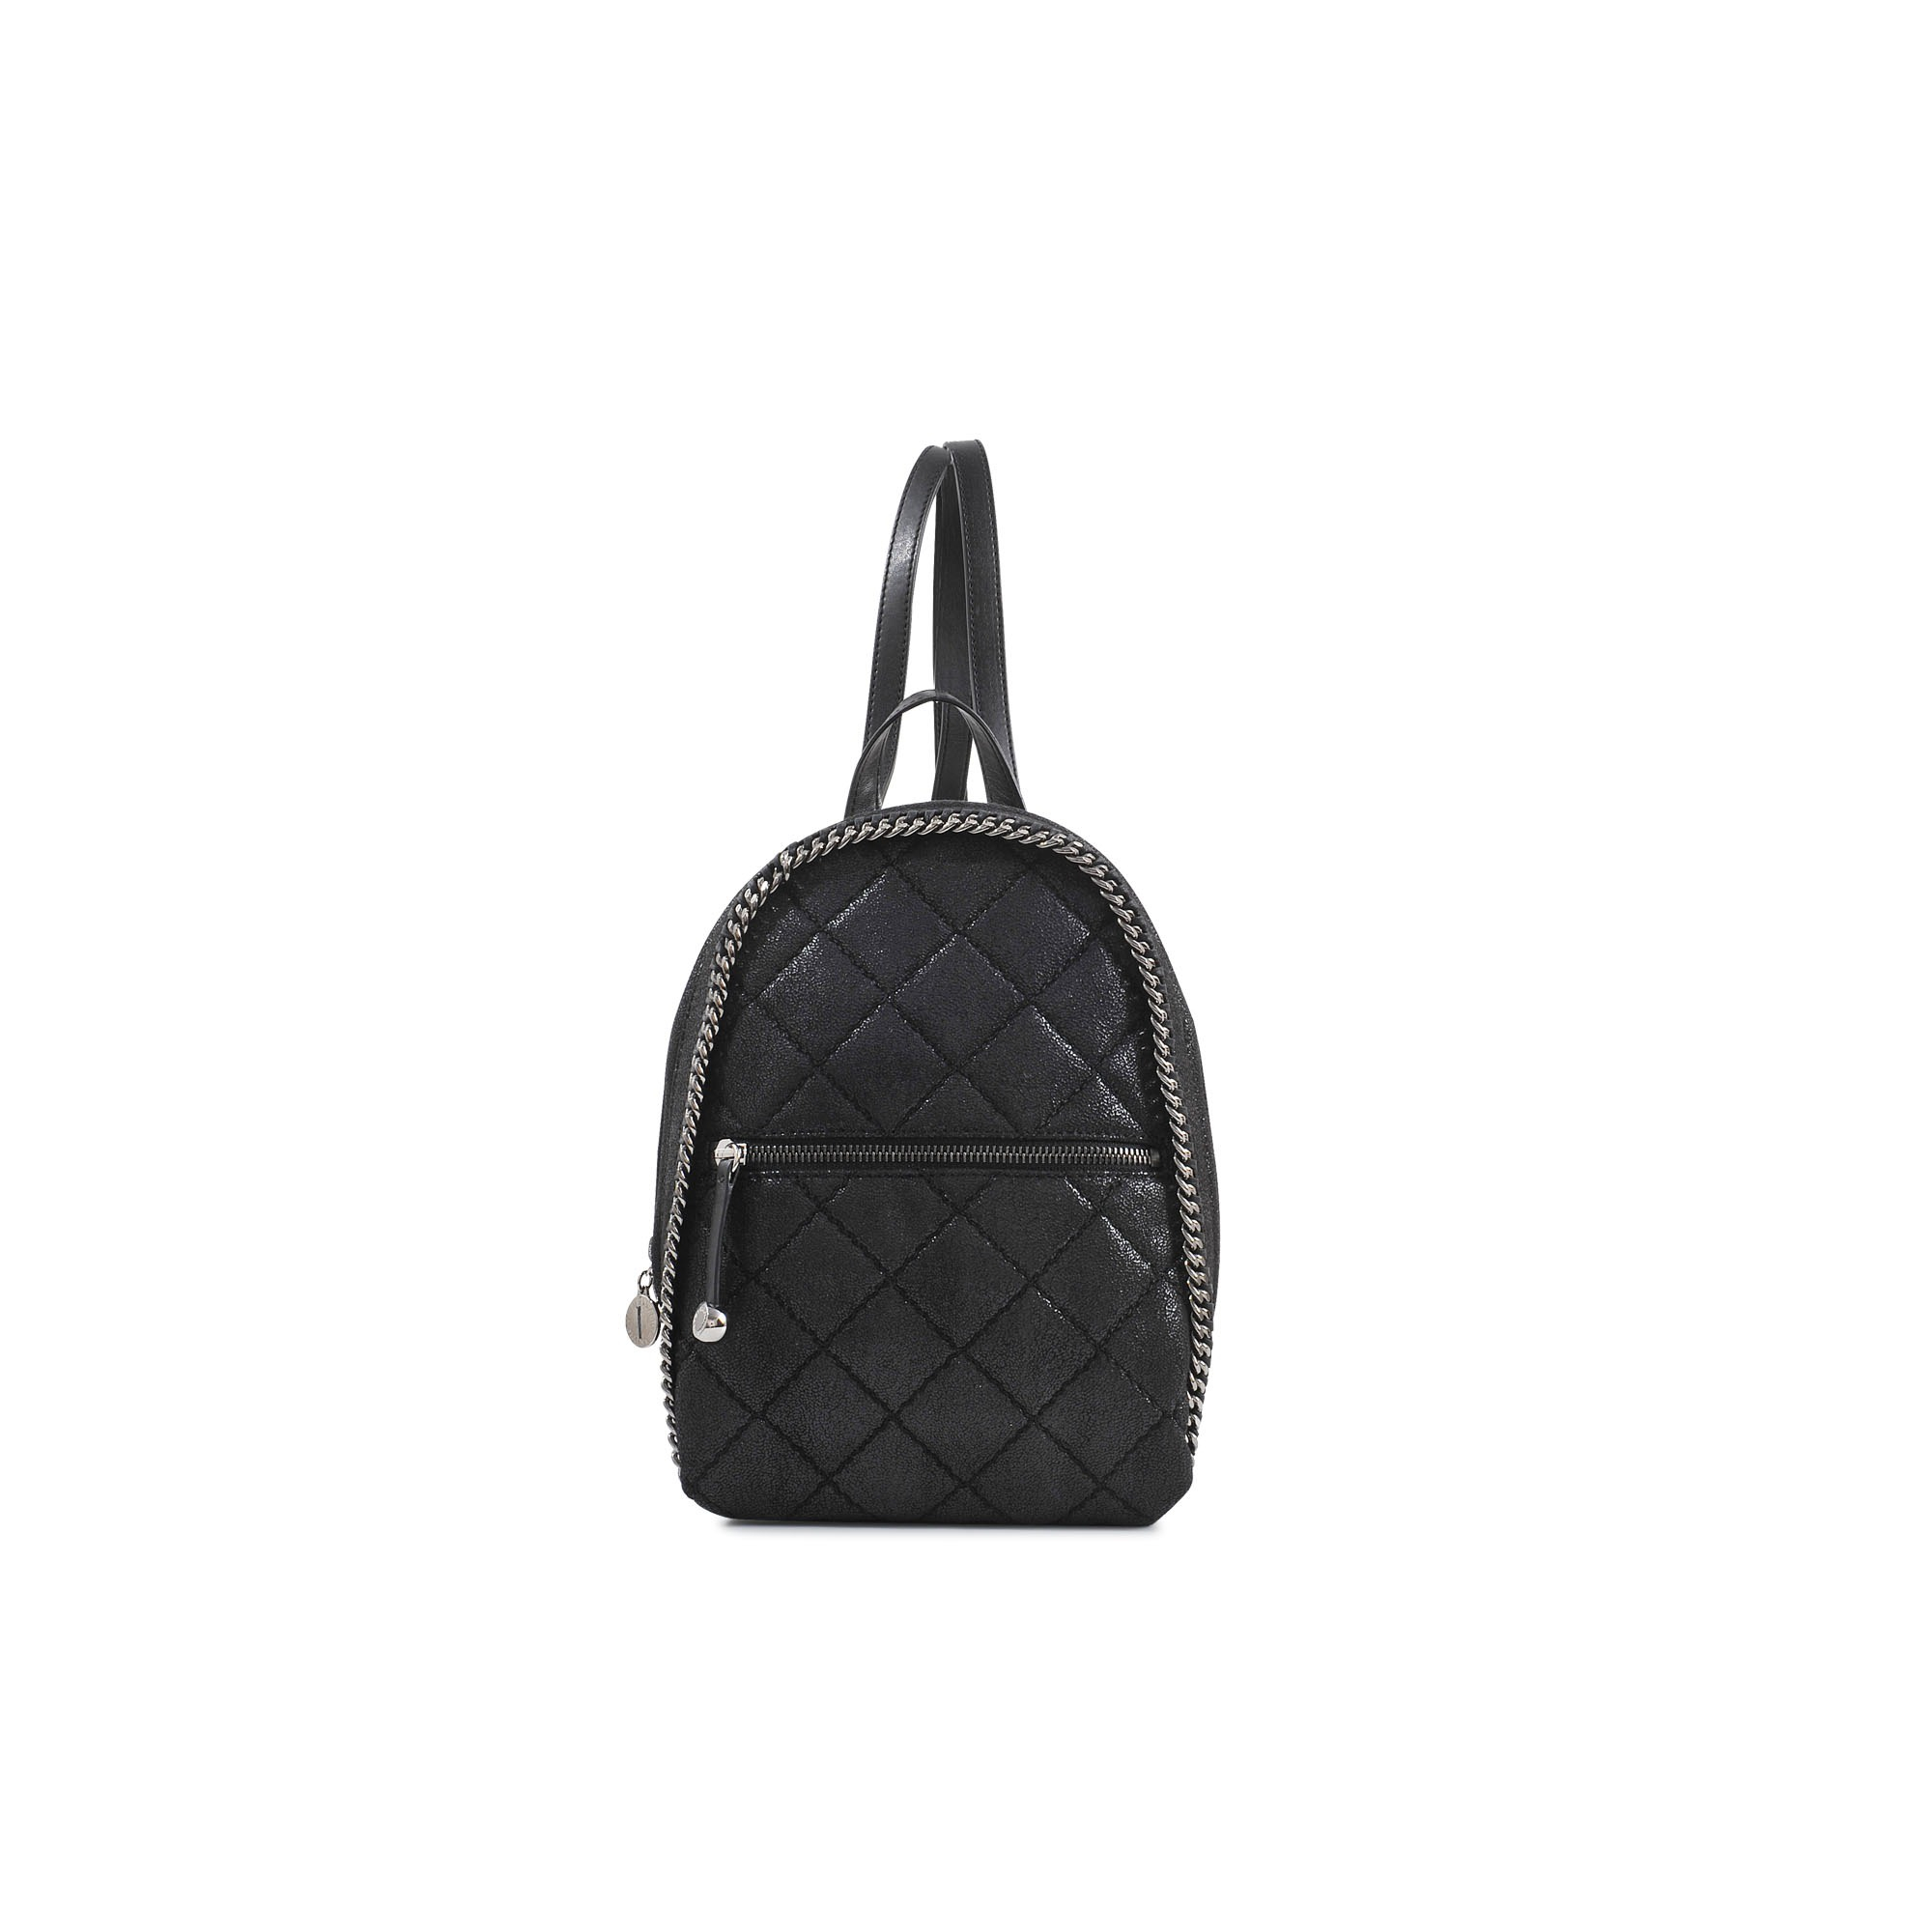 Stella mccartney Falabella Quilted Mini Backpack in Black | Lyst